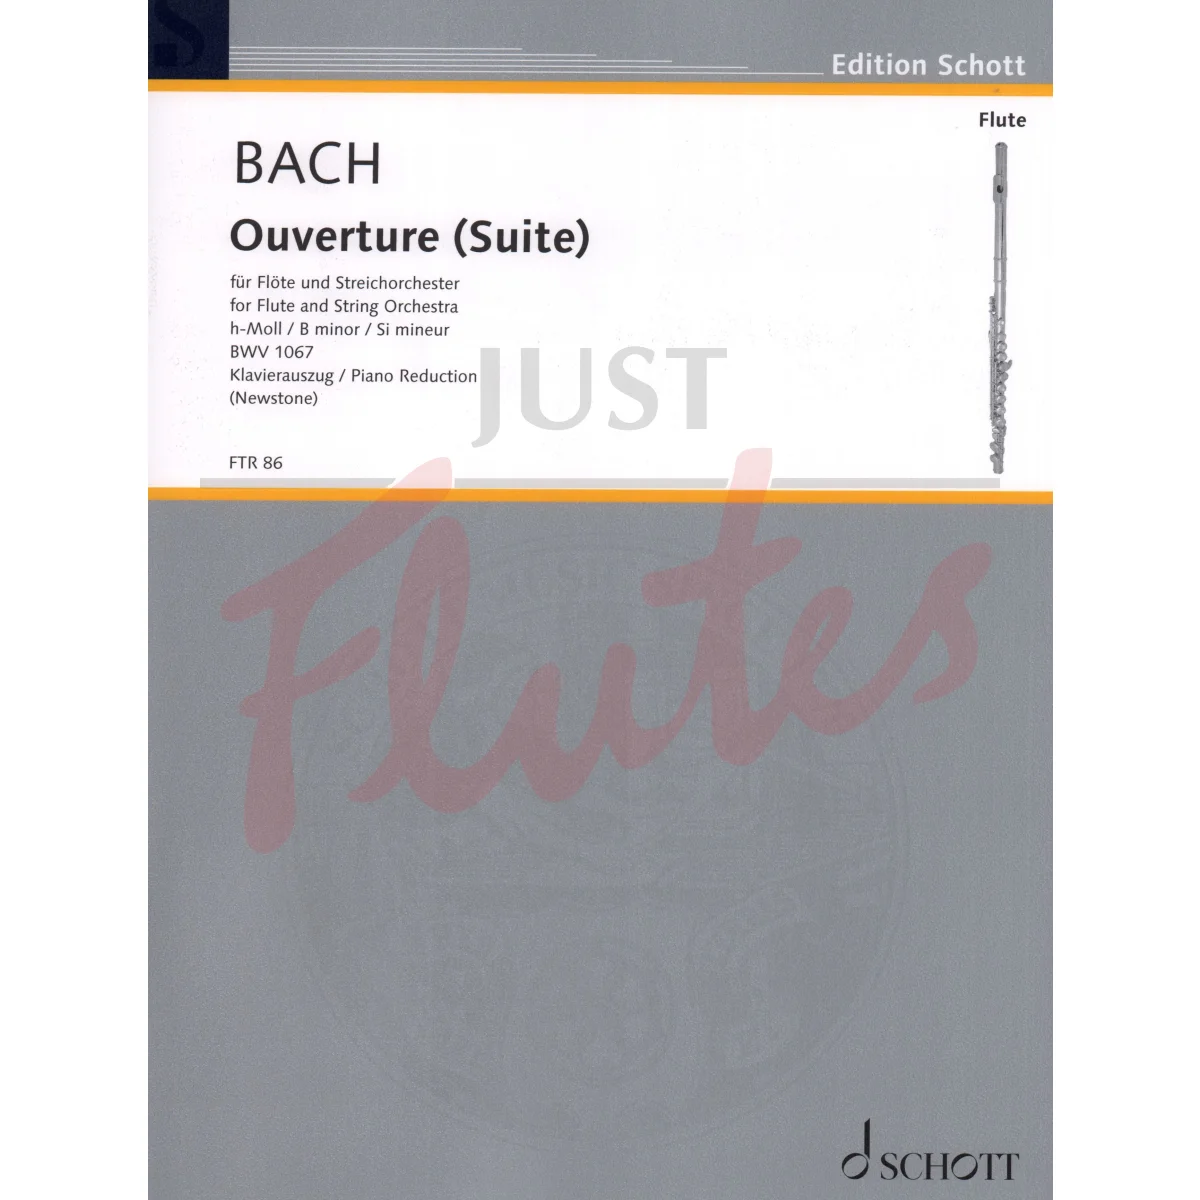 Overture (Suite) No. 2 in B minor for Flute and Piano 